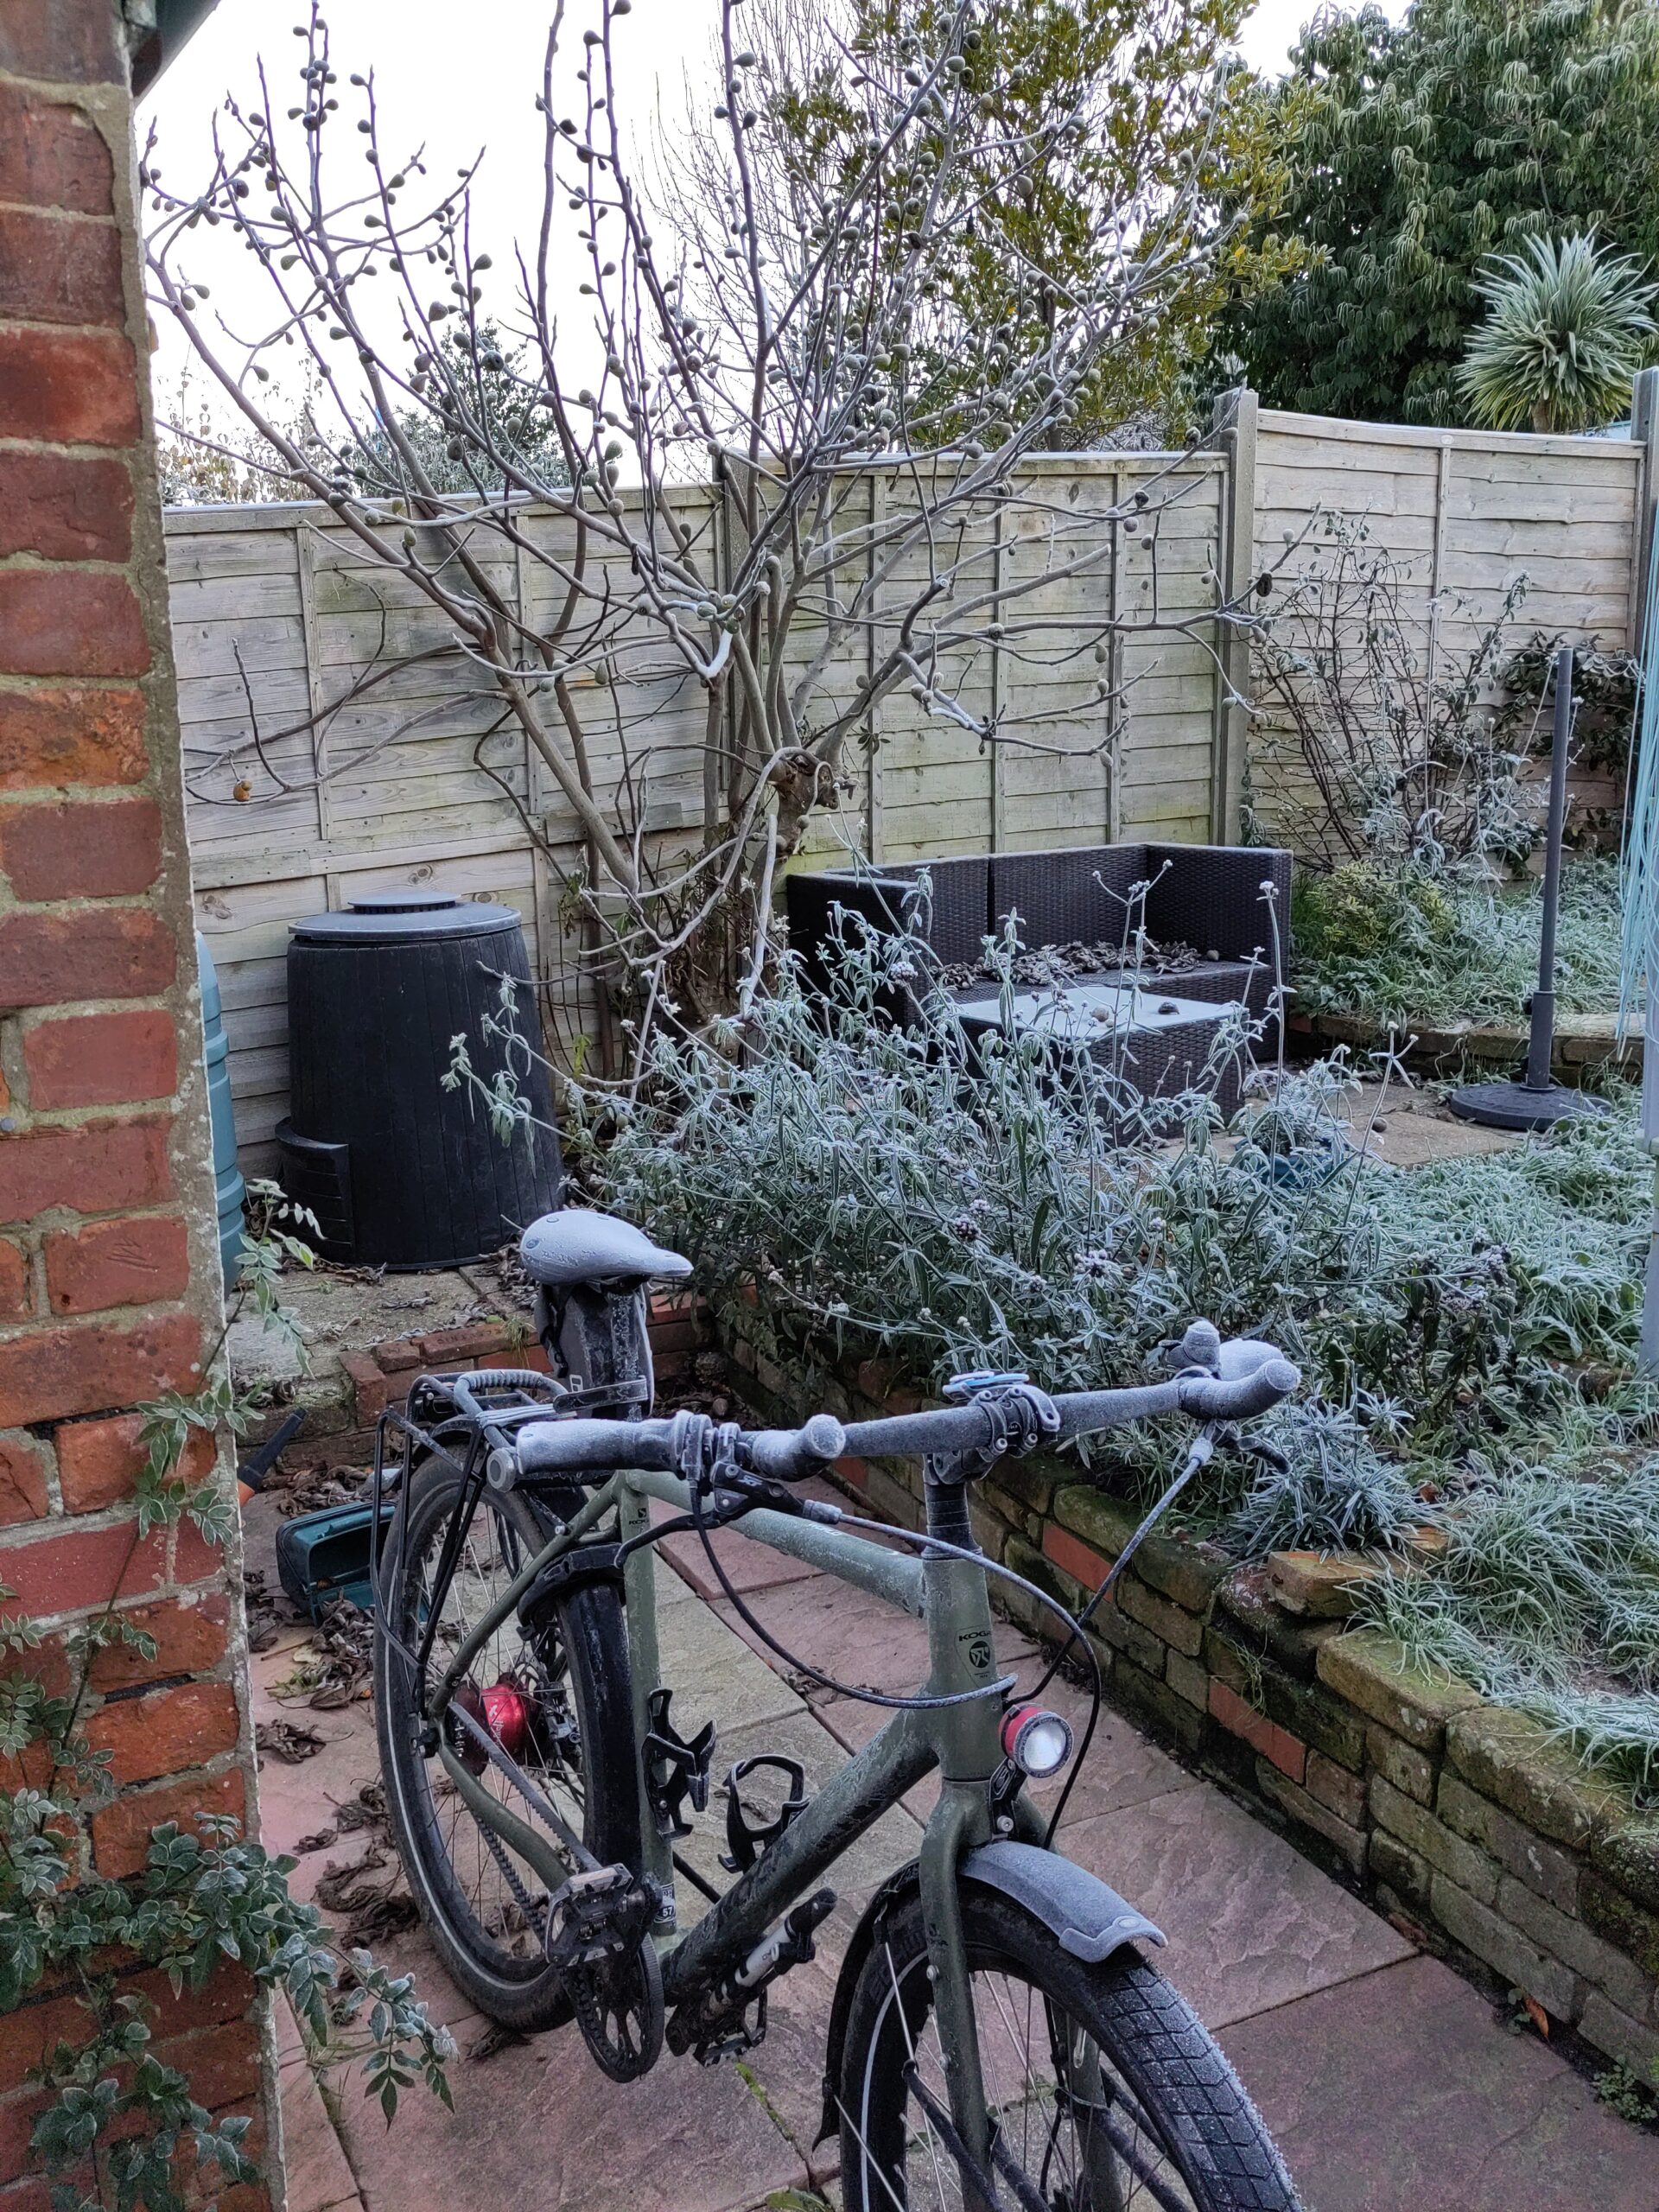 A frosted garden, with a bycicle rimmed with ice, in a suburban garden.